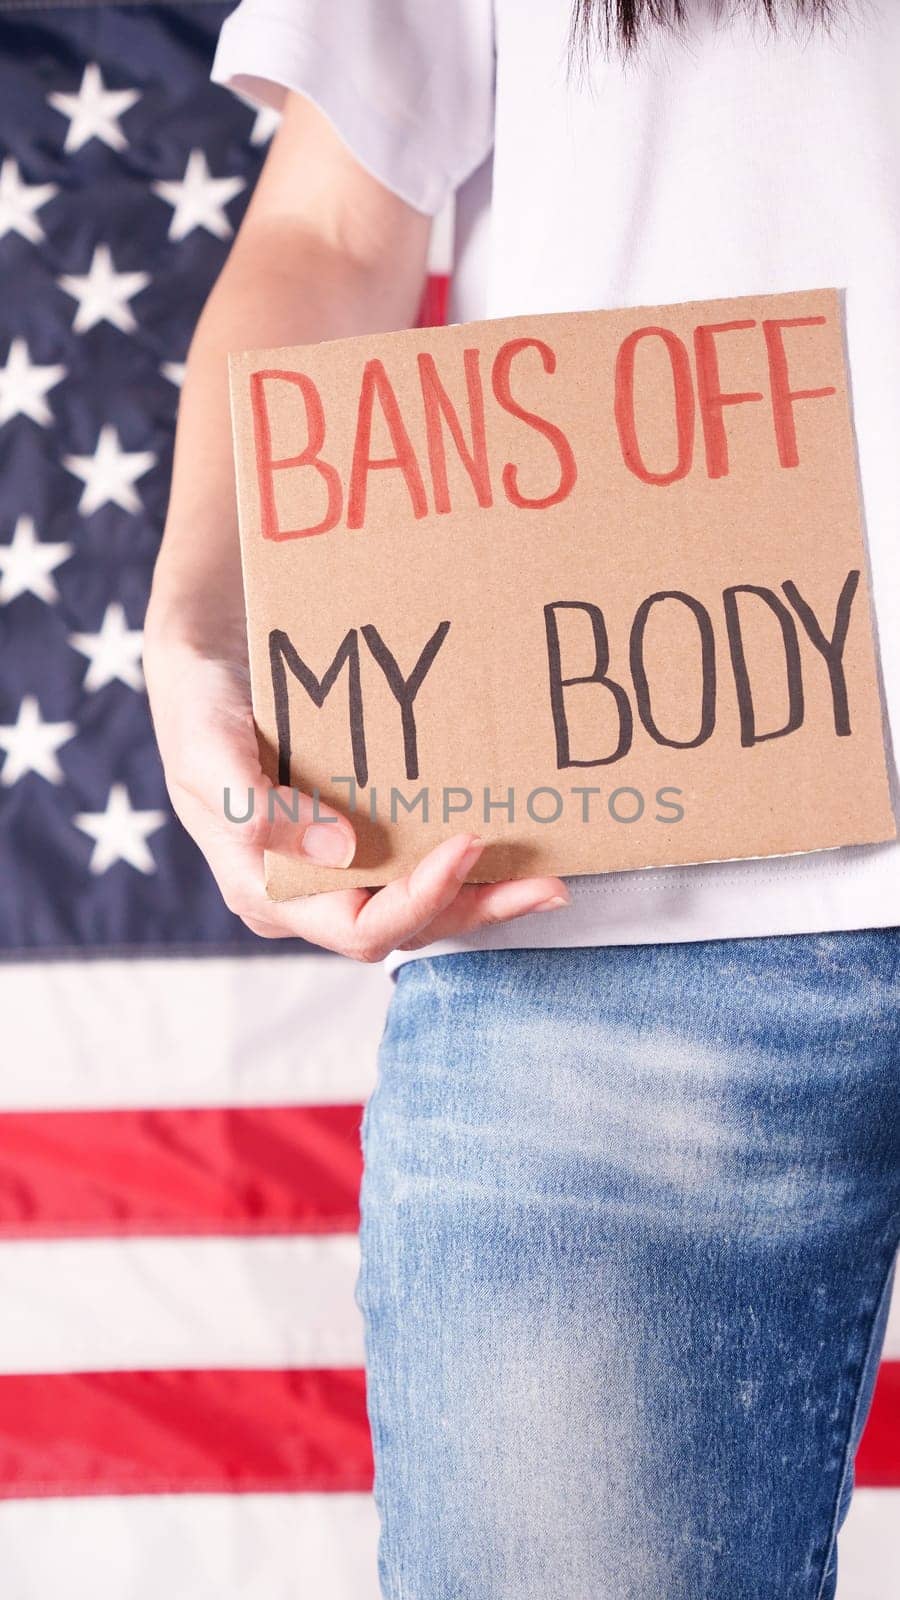 Woman holding a sign Bans Off My Body American flag on background. Protest against anti abortion law. Women's strike. Womens rights freedom